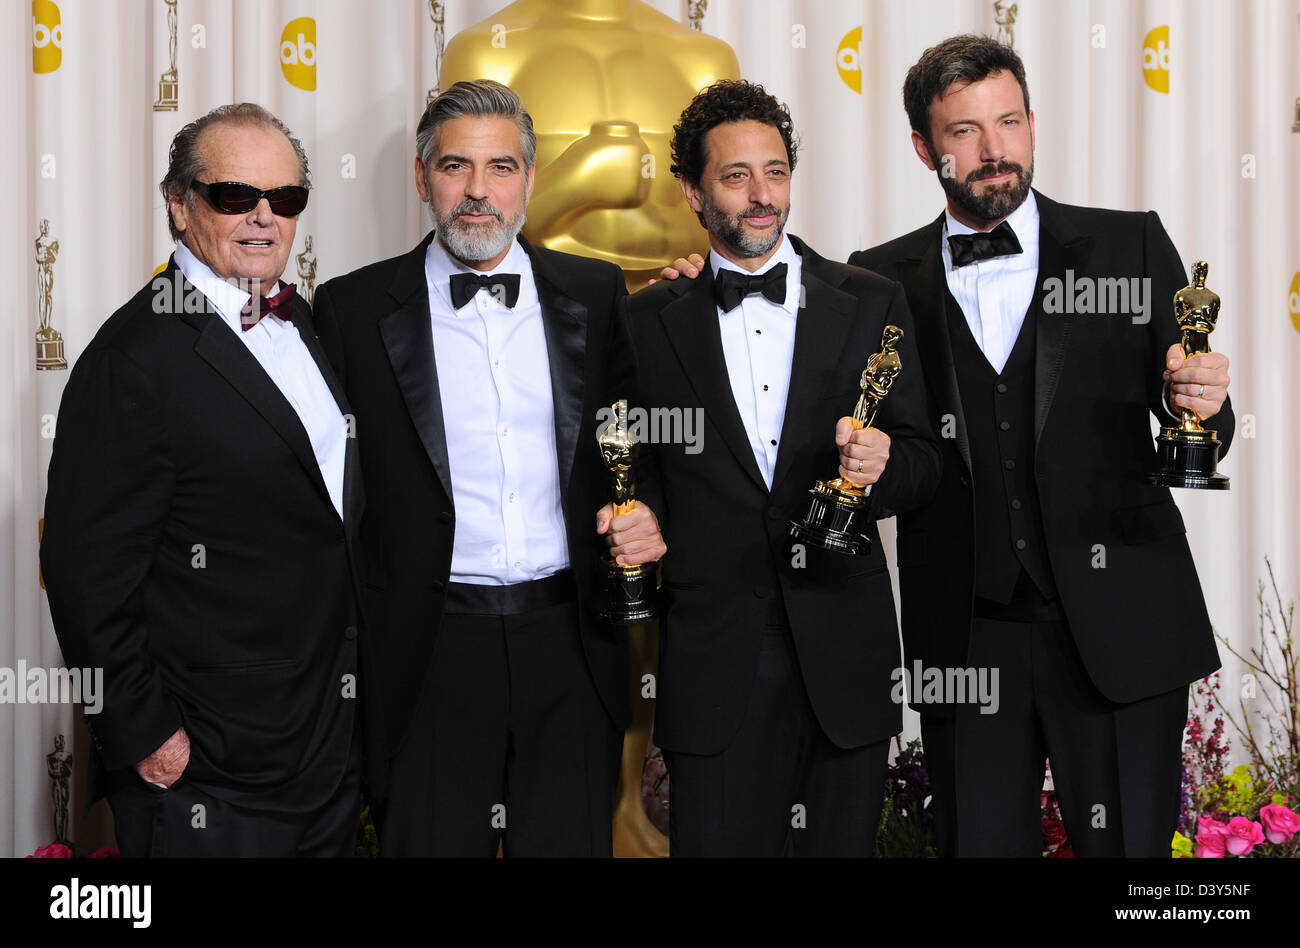 Los Angeles, USA. 24th February 2013. Jack Nicholson, George Clooney, Grant Heslov and Ben Affleck   in the winners press room at the 85th Annual Academy Awards Oscars, Los Angeles, America - 24 Feb 2013.  Credit:  Sydney Alford / Alamy Live News Stock Photo